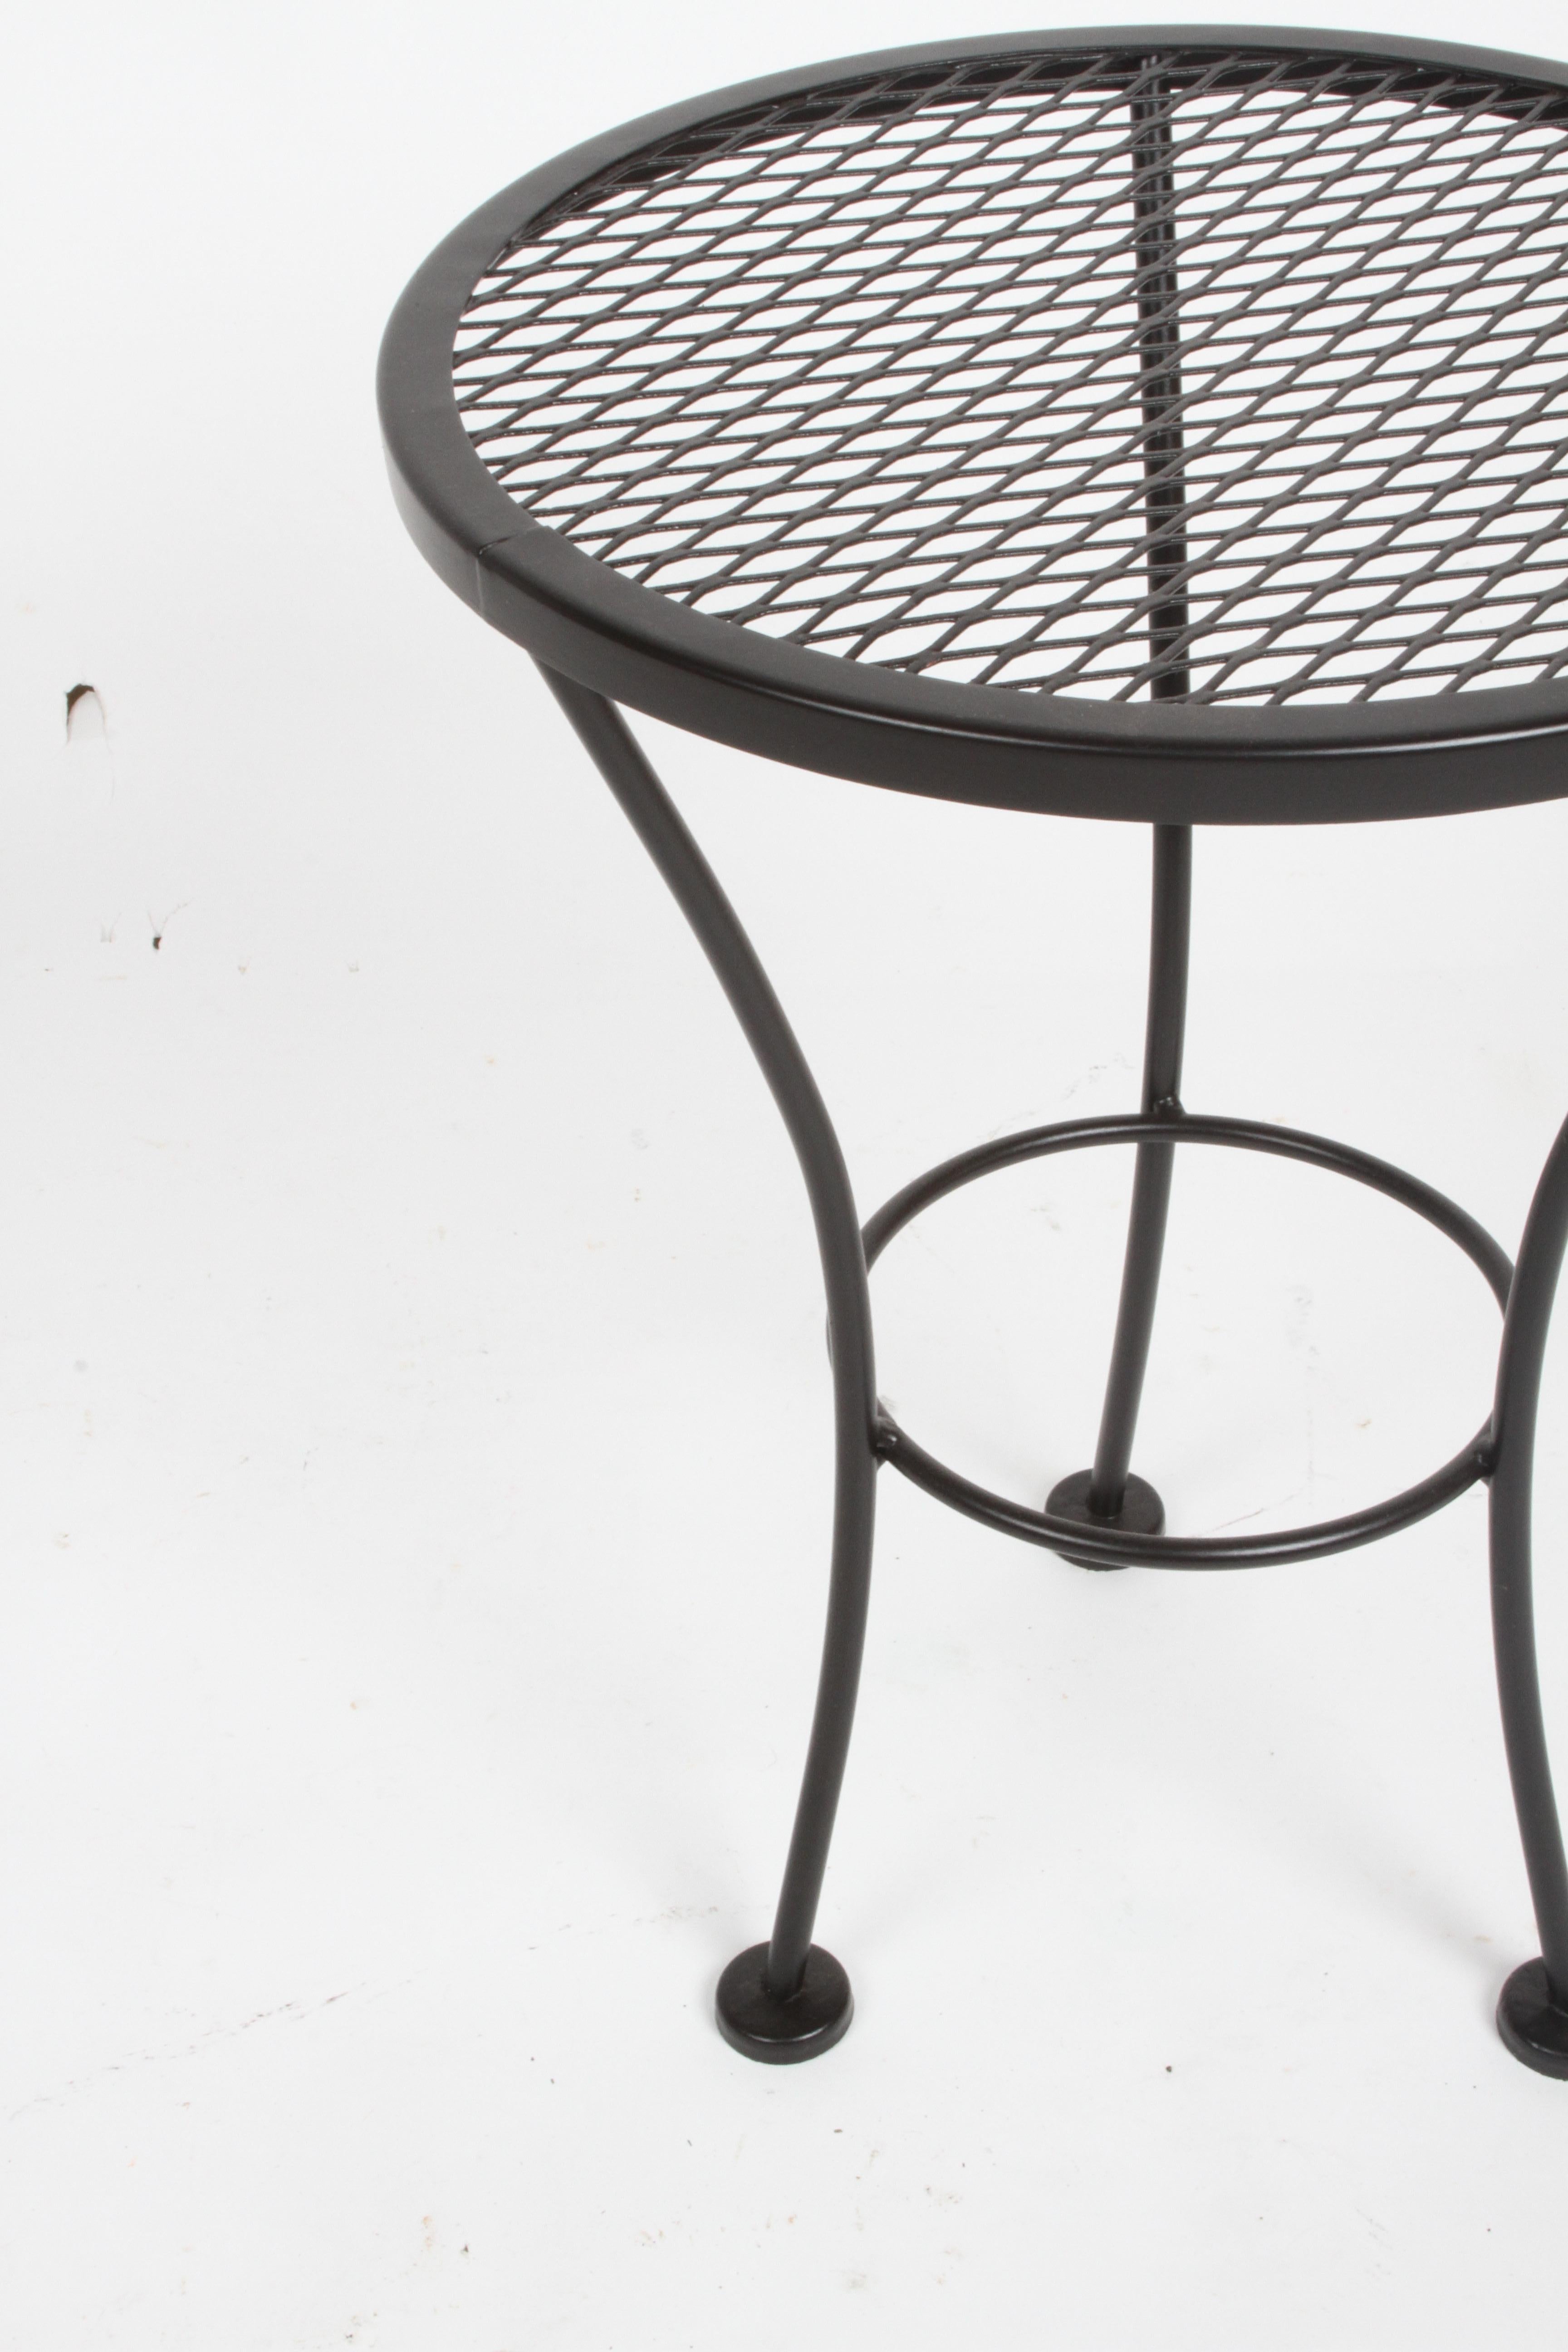 American Russell Woodard Round Black Wrought Iron & Mesh Patio Side Table or Drinks Stand